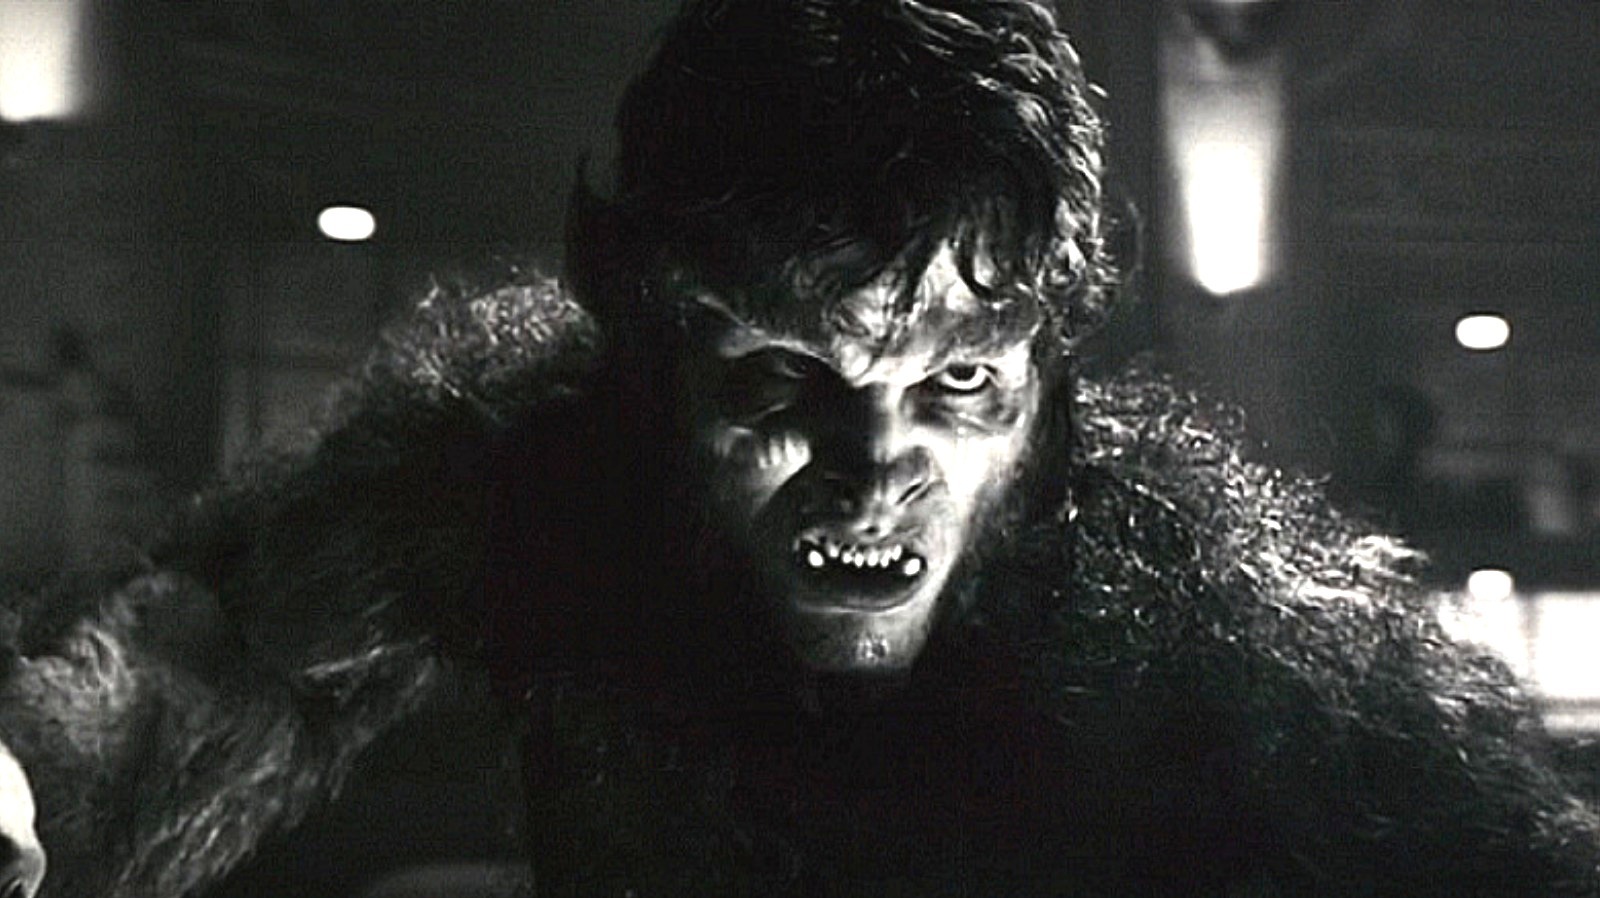 Werewolf By Night Behind-The-Scenes Photos Show The Making Of Man